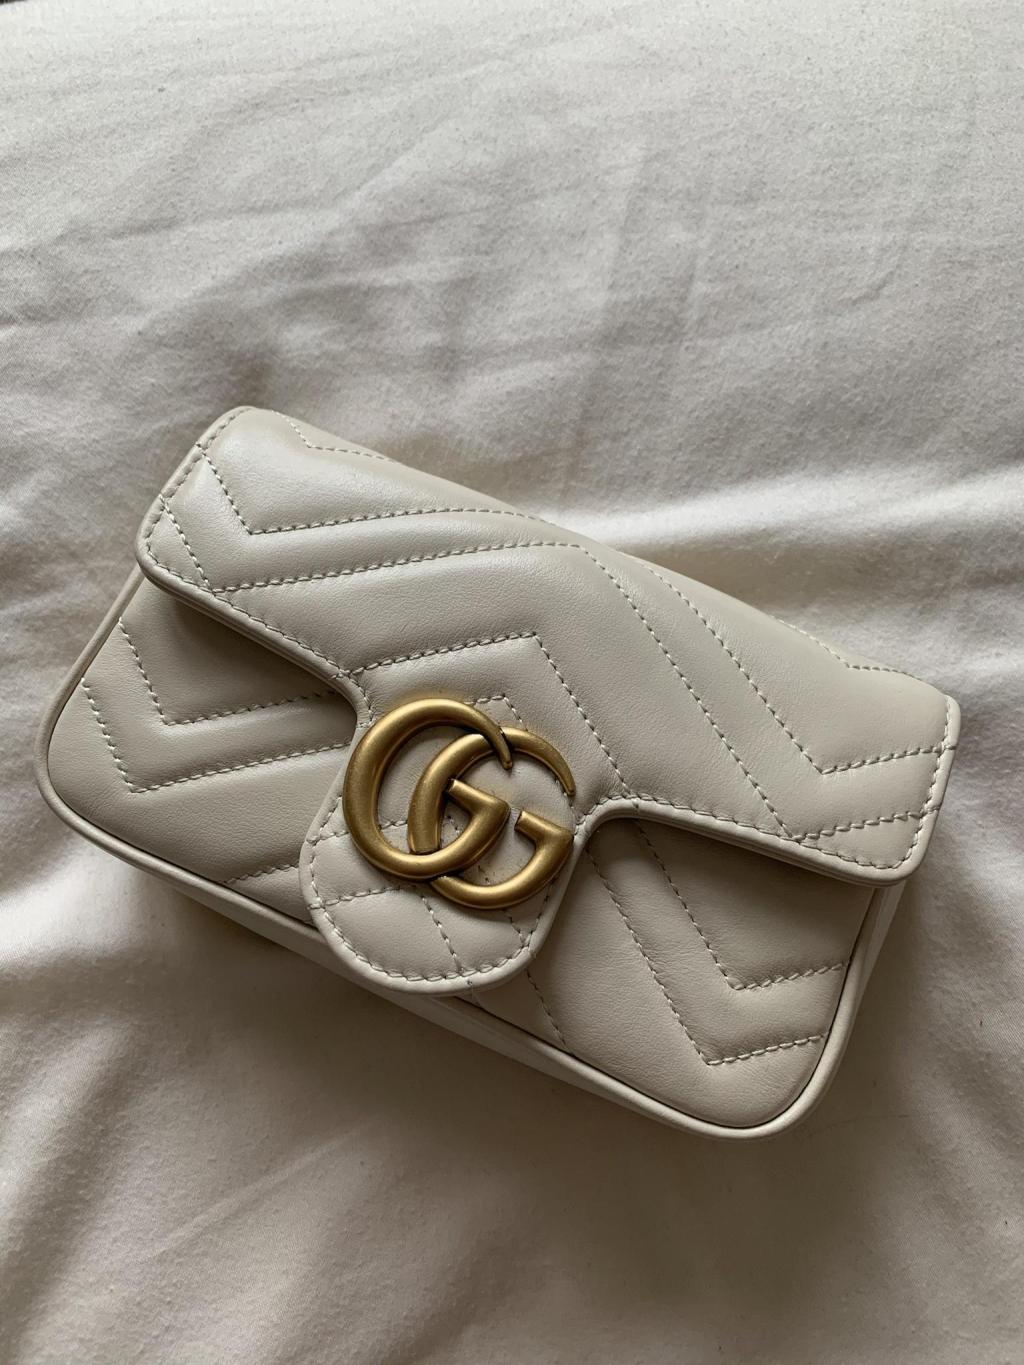 [Review] Gucci Marmont Super Mini (White) from Orange Sofa/Couch Factory